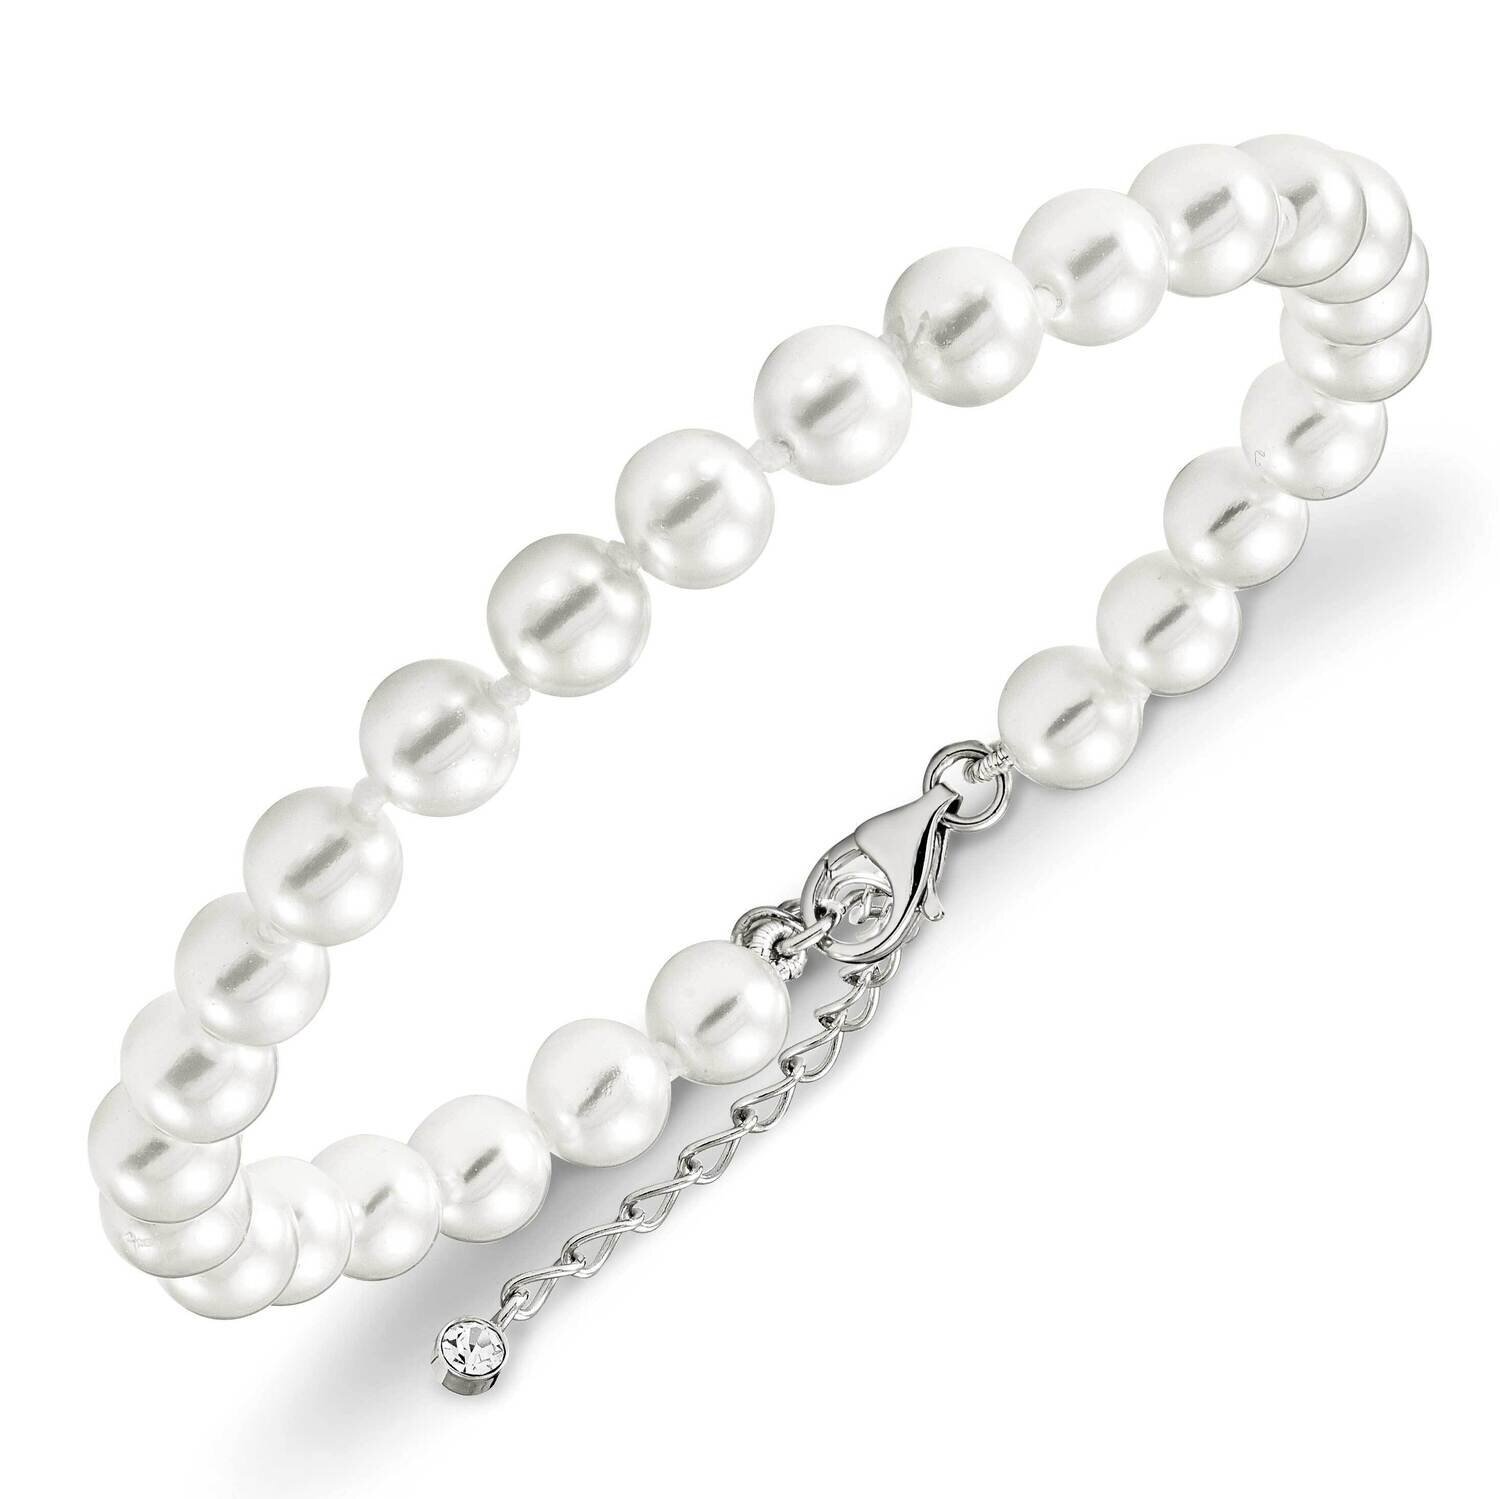 Majestik Rhodium Plated 7-8mm Imitat Shell Pearl & Cz with 2 Inch Extension Anklet Sterling Silver QMJA78W-8.5